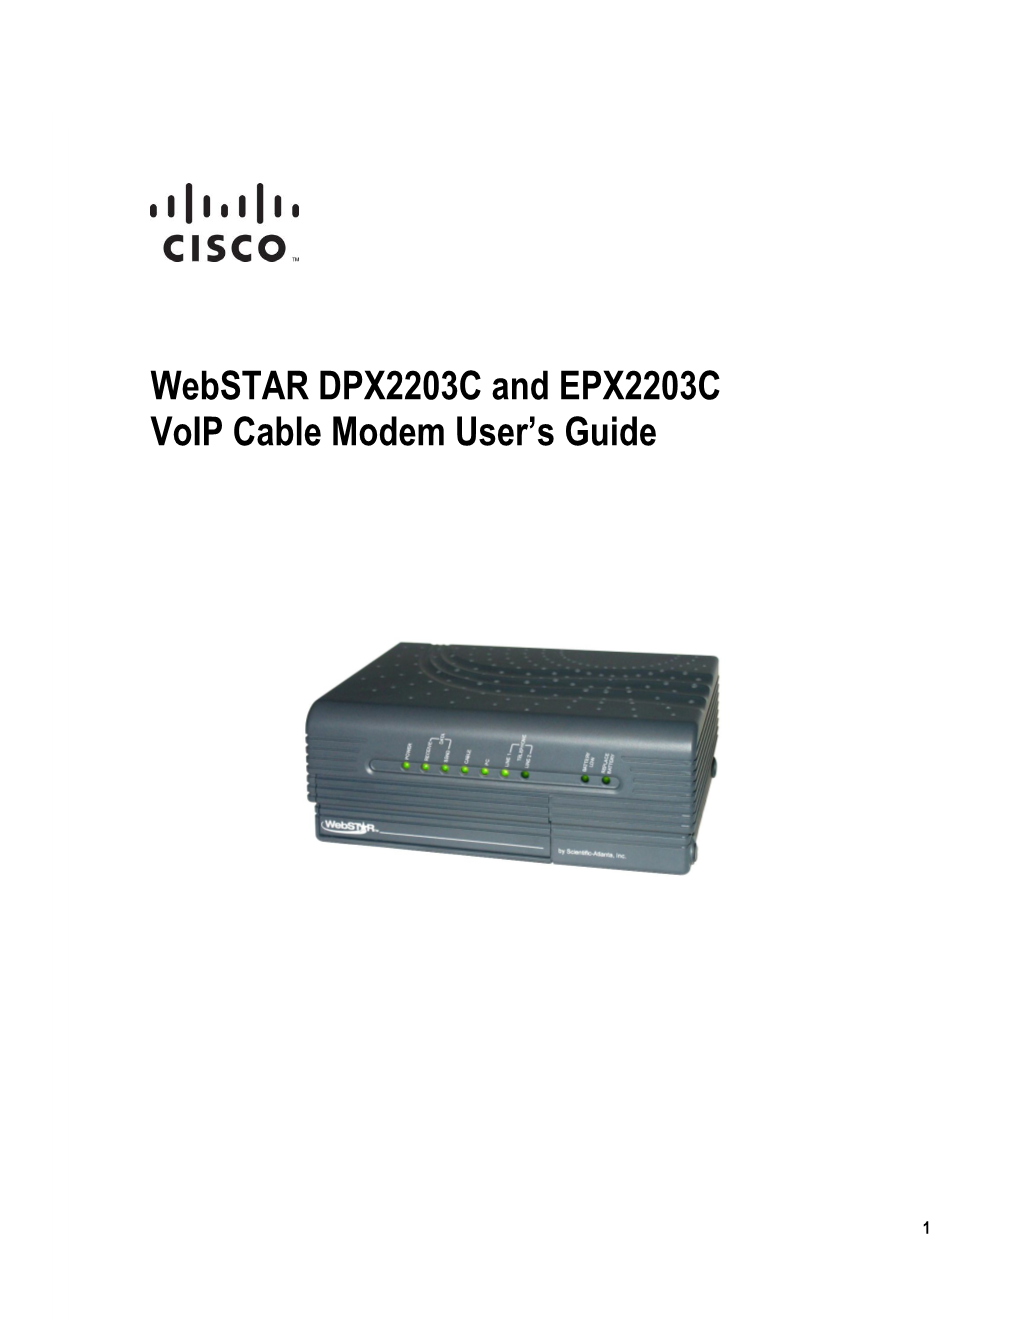 Webstar DPX2203C and EPX2203C Voip Cable Modem User's Guide